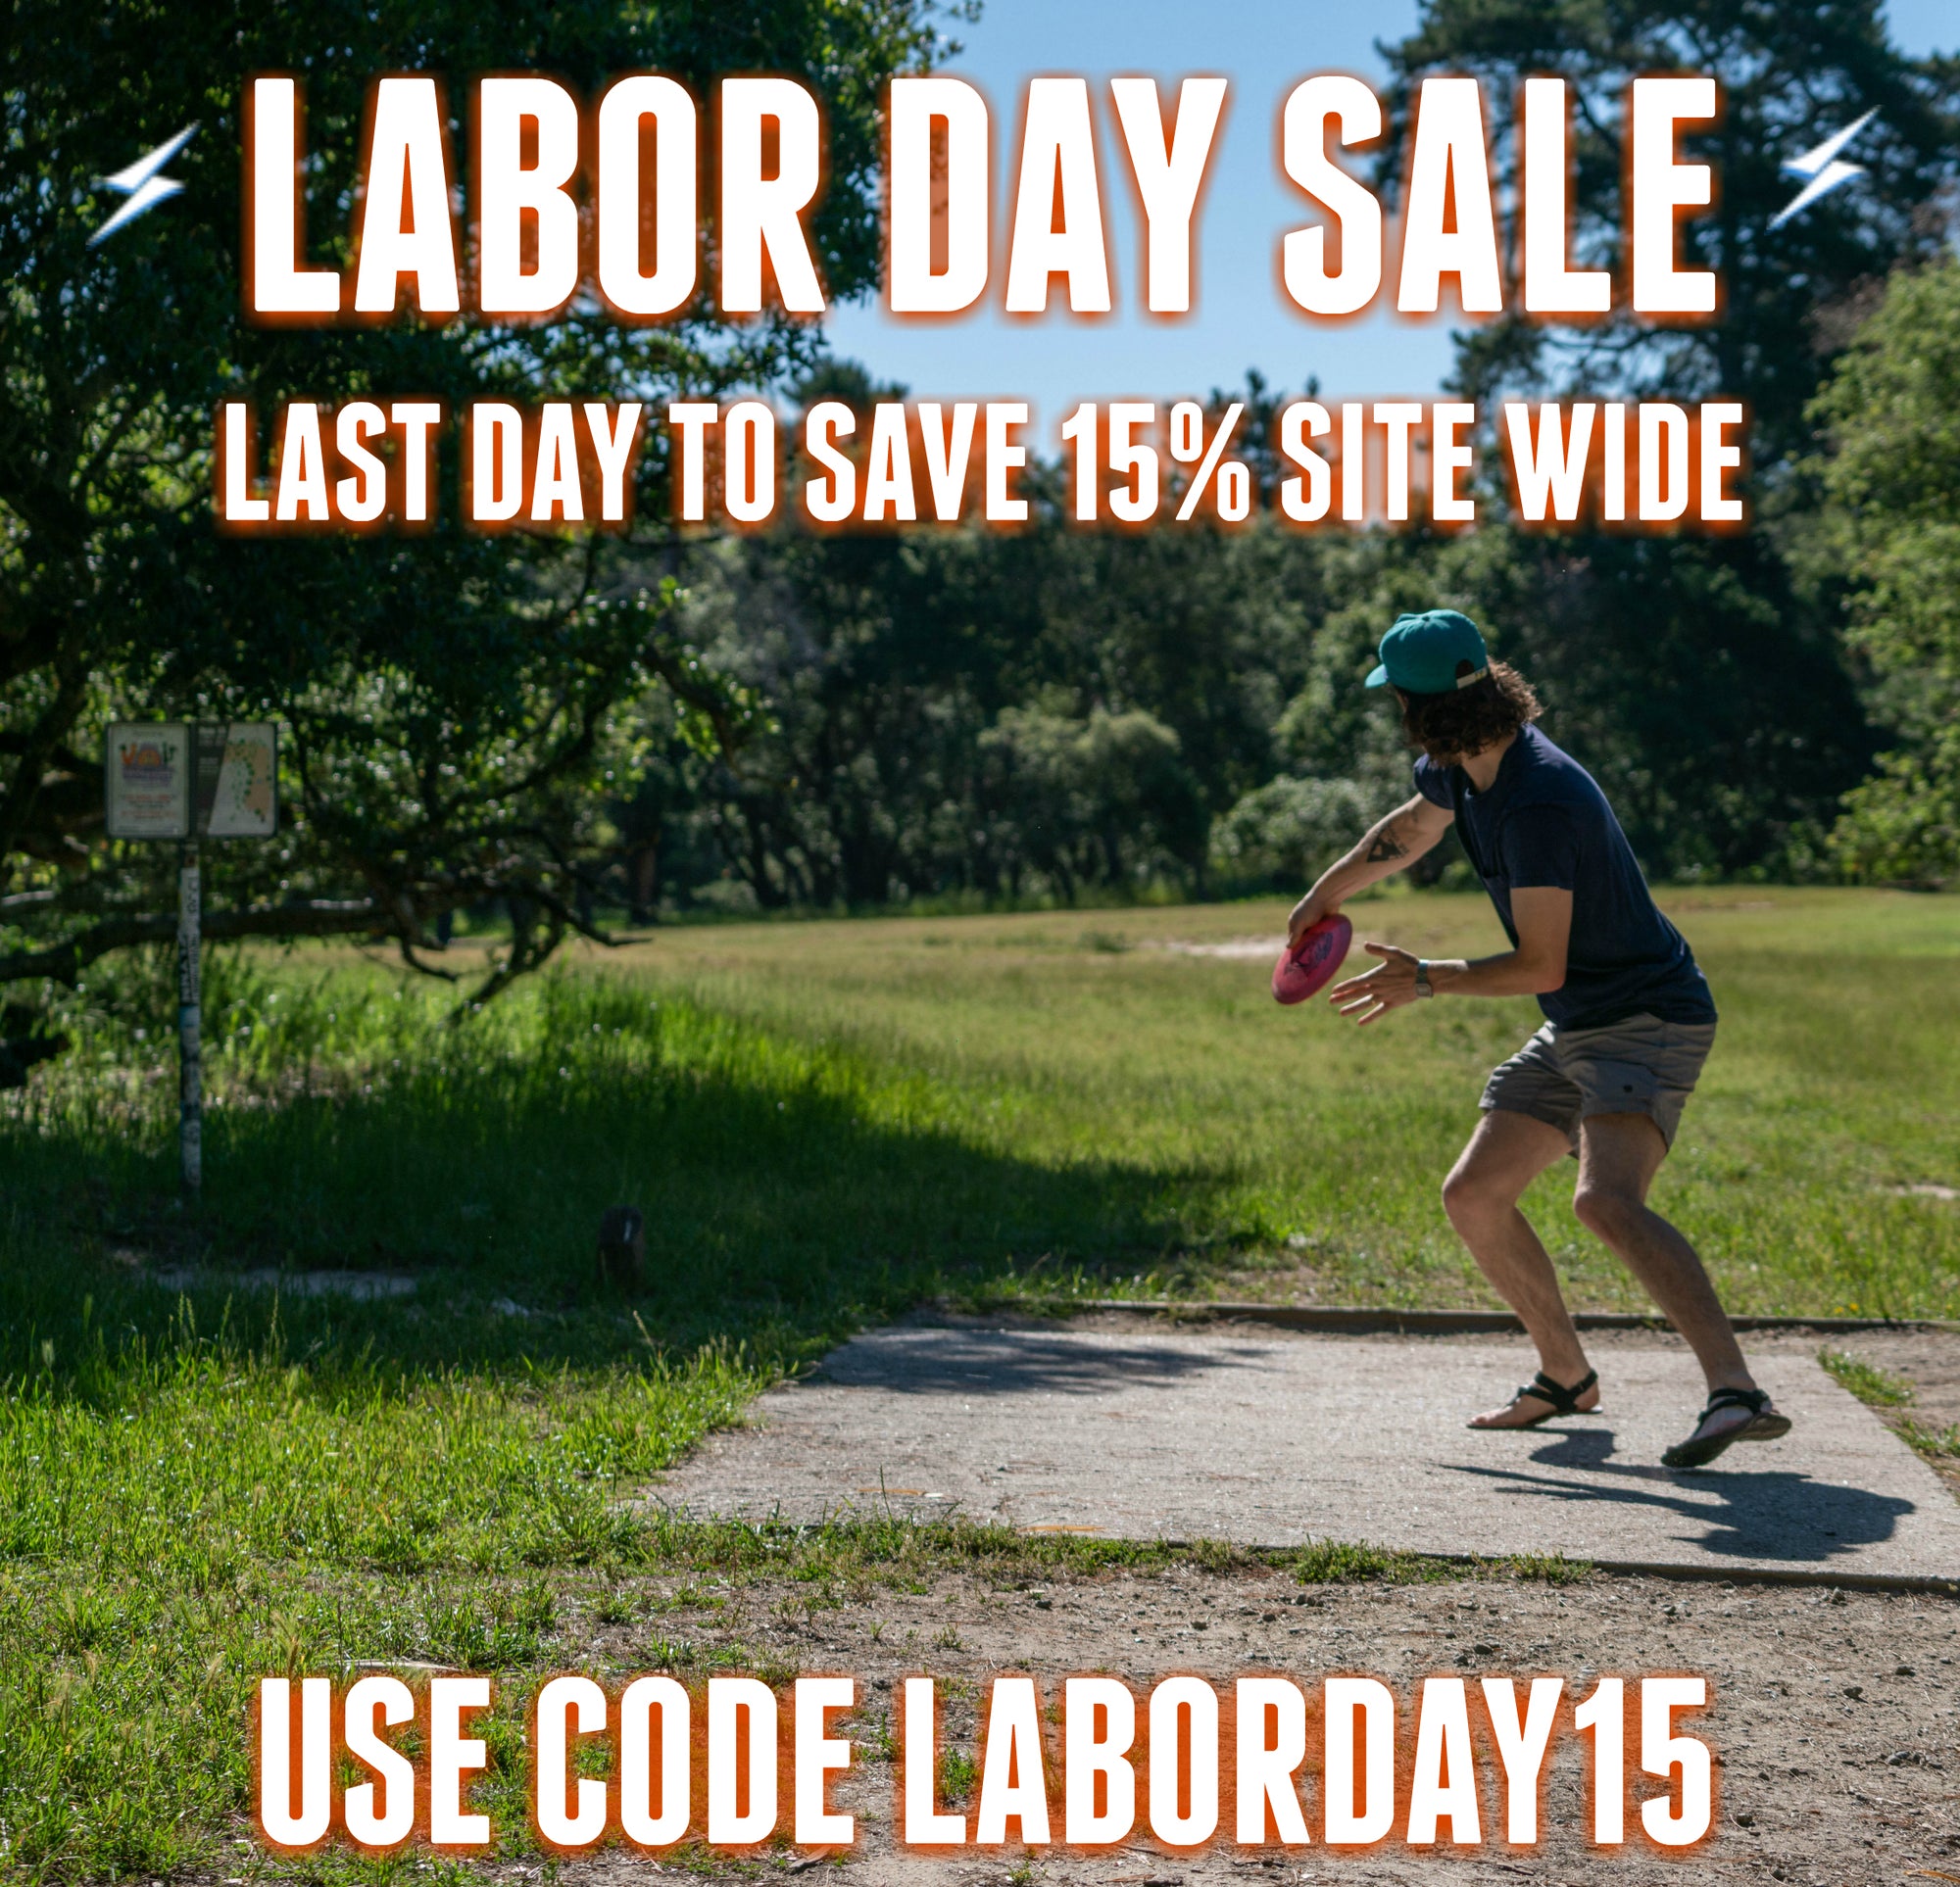 LAST DAY TO SAVE 15% SITE WIDE